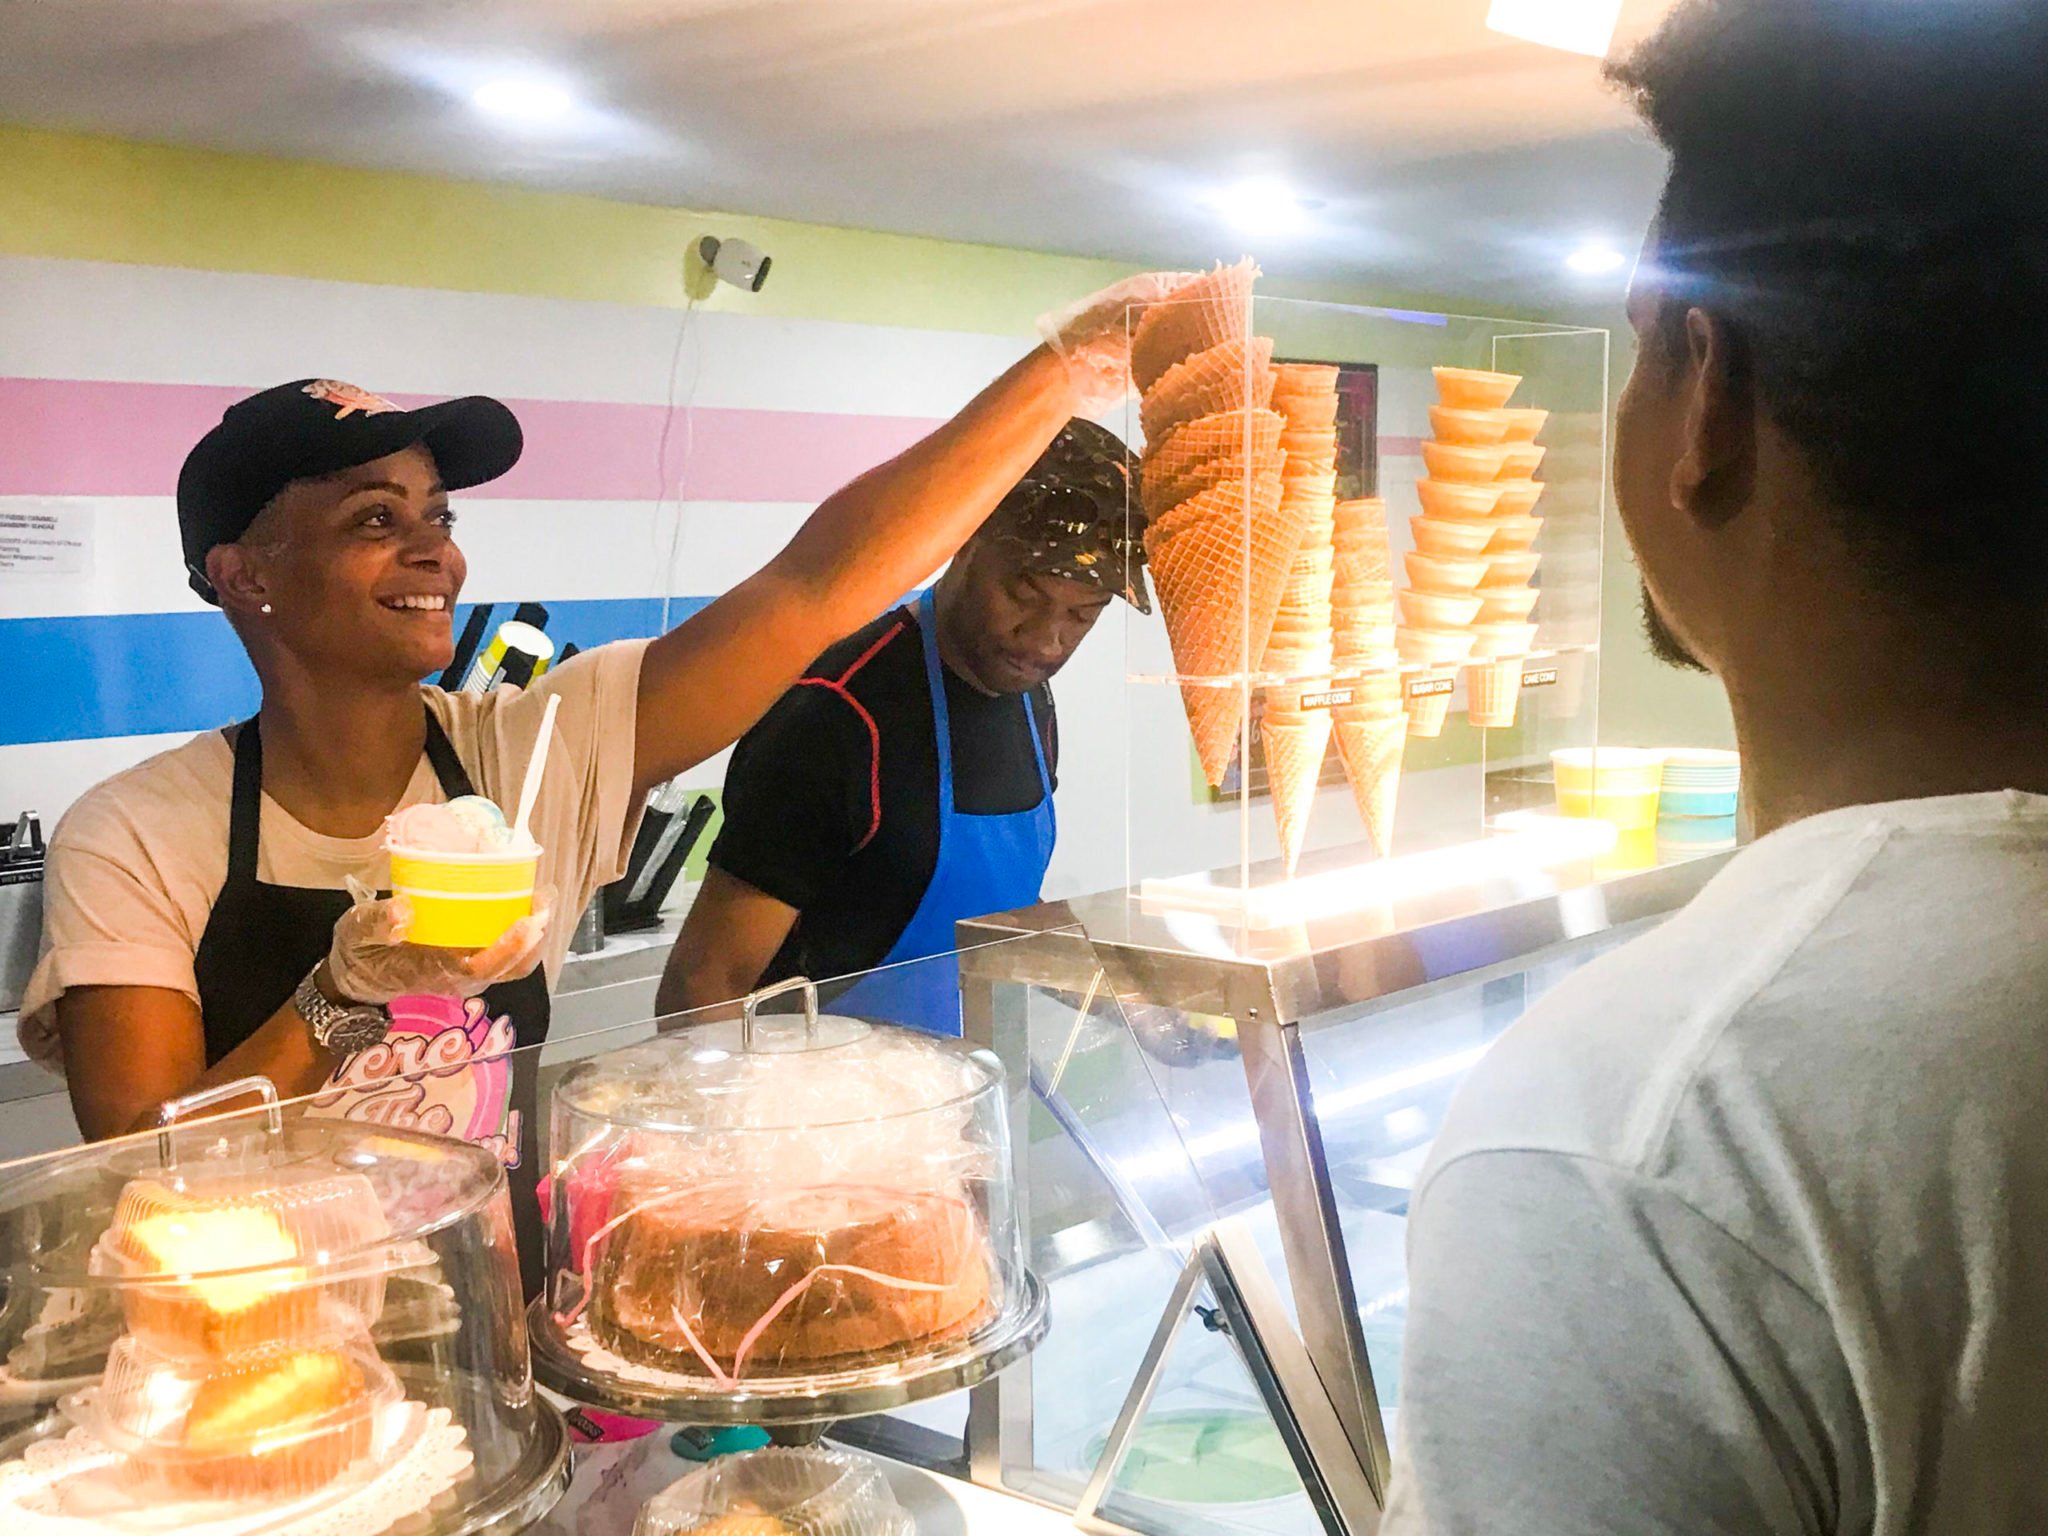 Here's The Scoop ice cream shop owner Karin Sellers. Photograph by Mion Edwards.